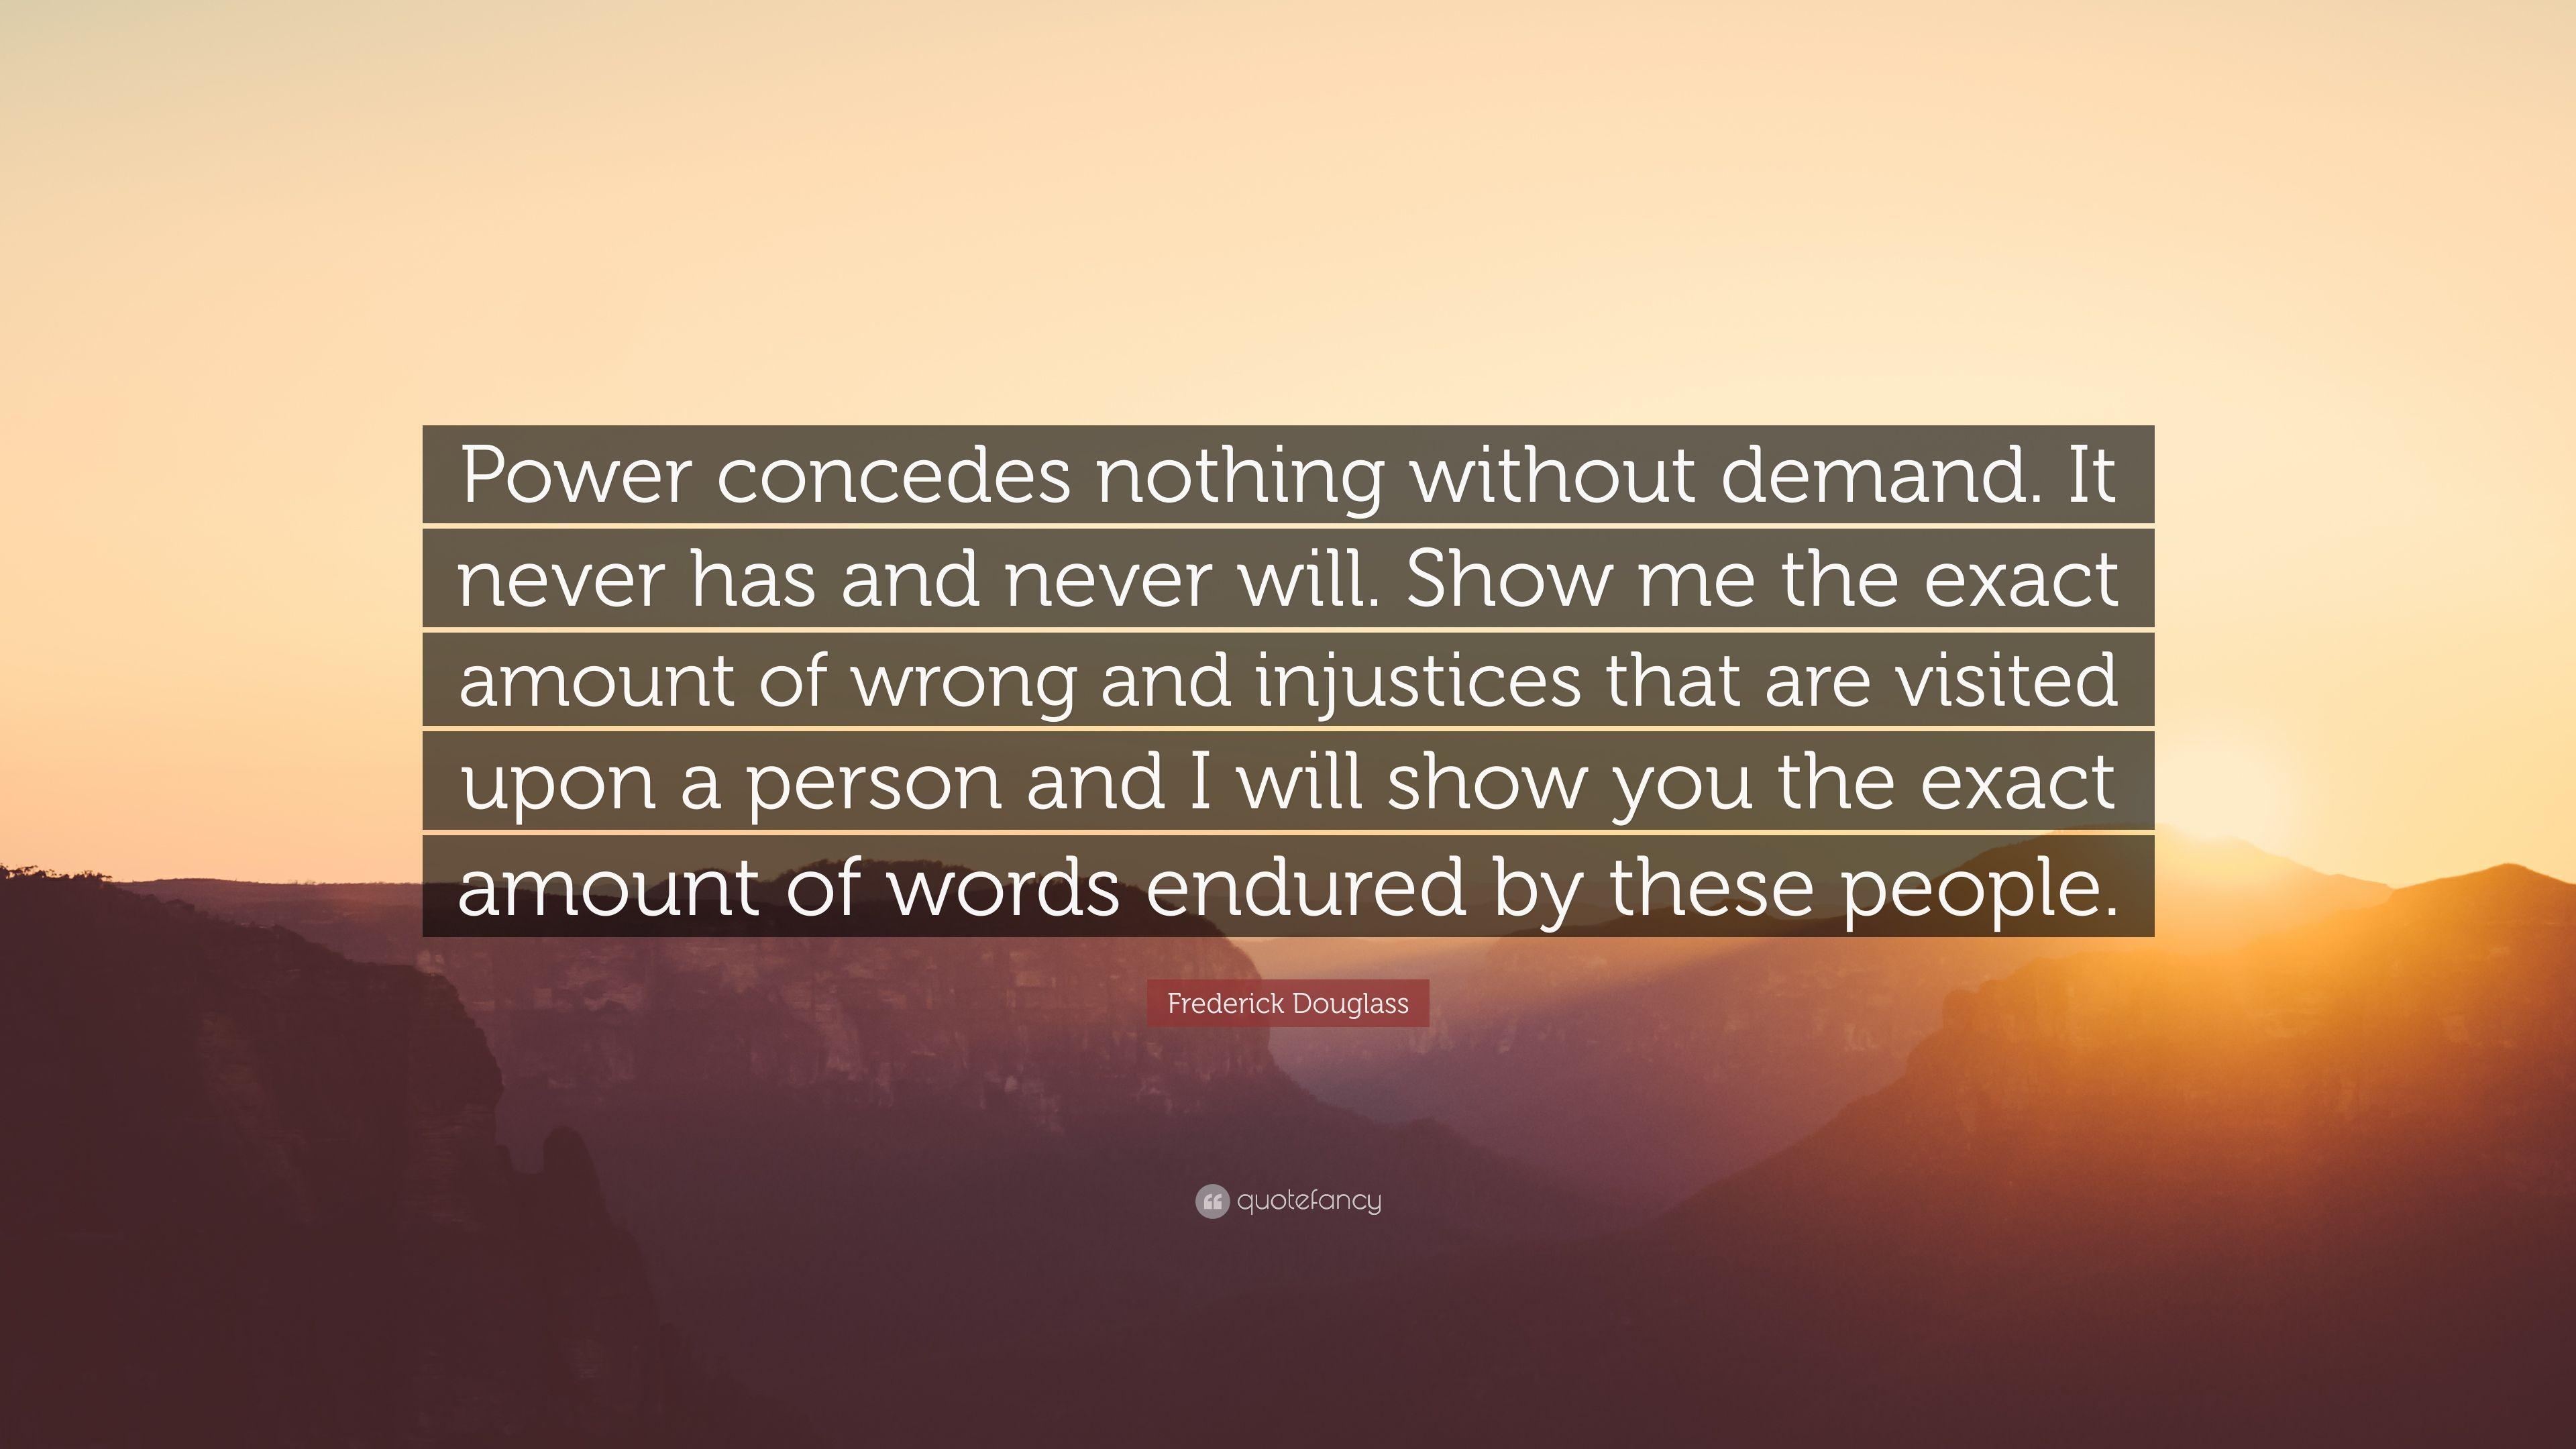 Frederick Douglass Quote: “Power concedes nothing without demand